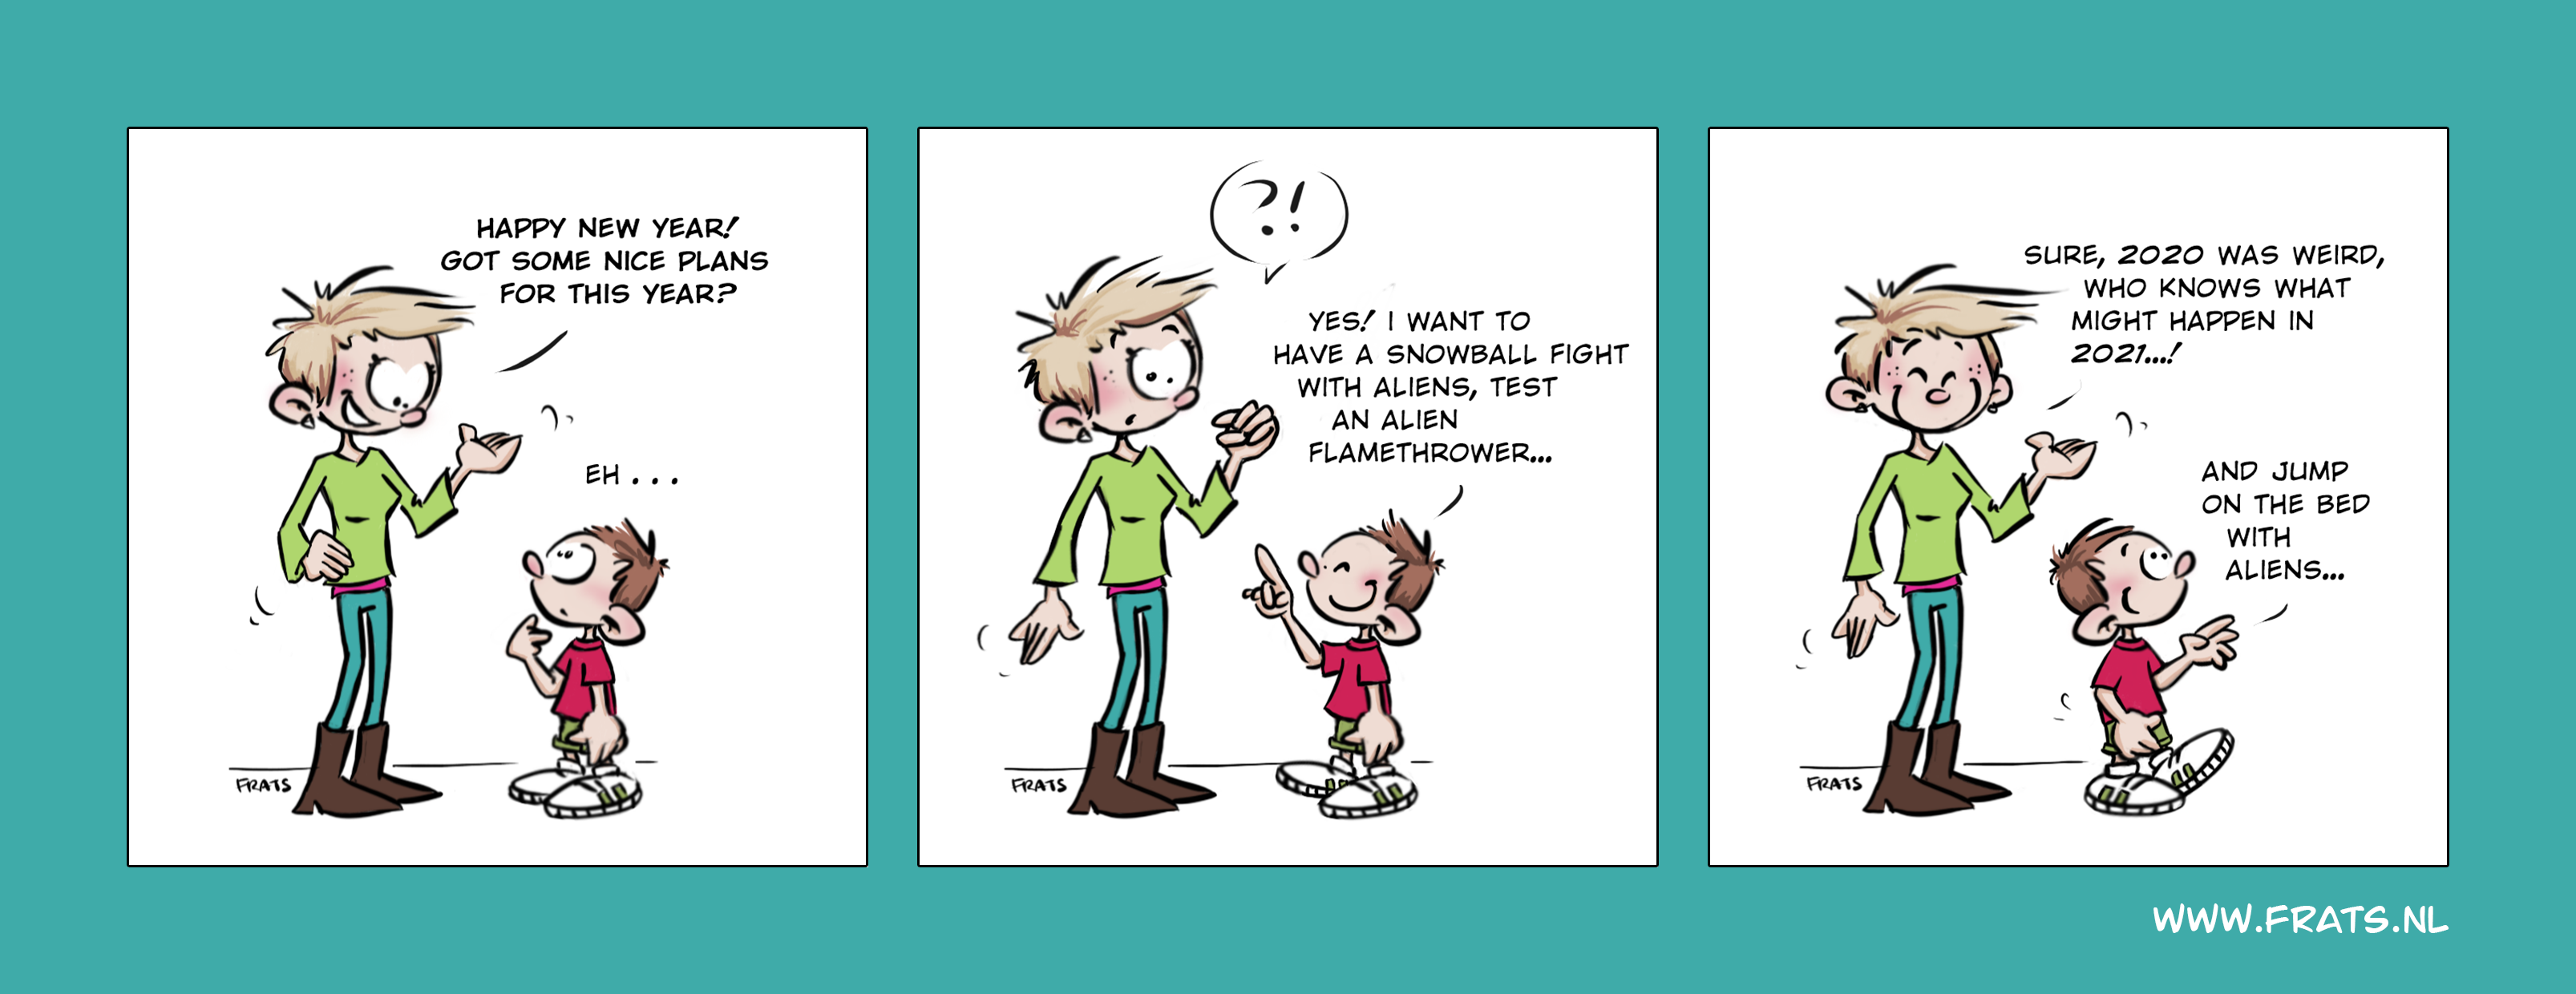 Rebels comic strip about new year expectations